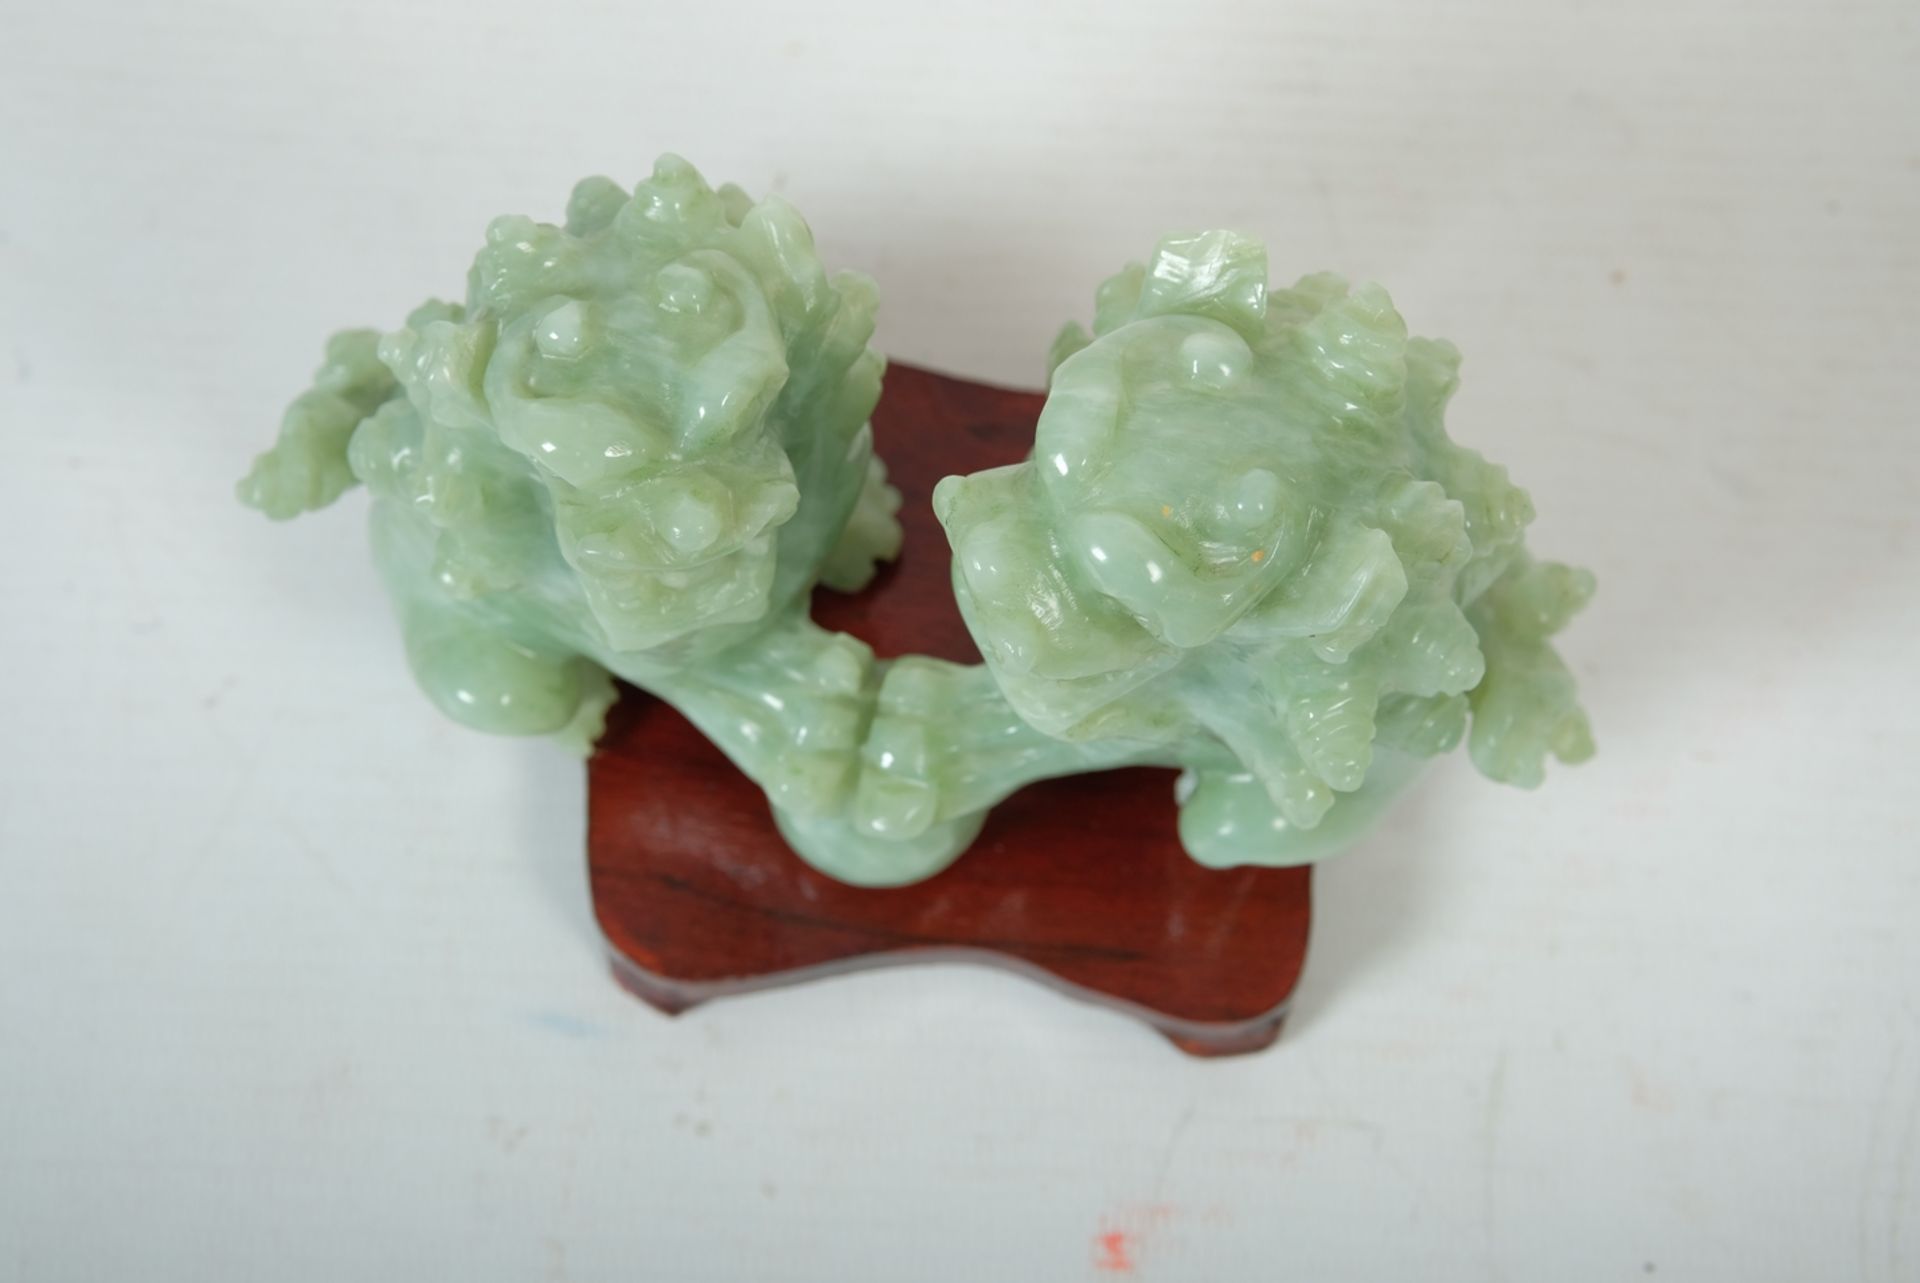 Guardian lions made of jade, China, with base - Image 2 of 2